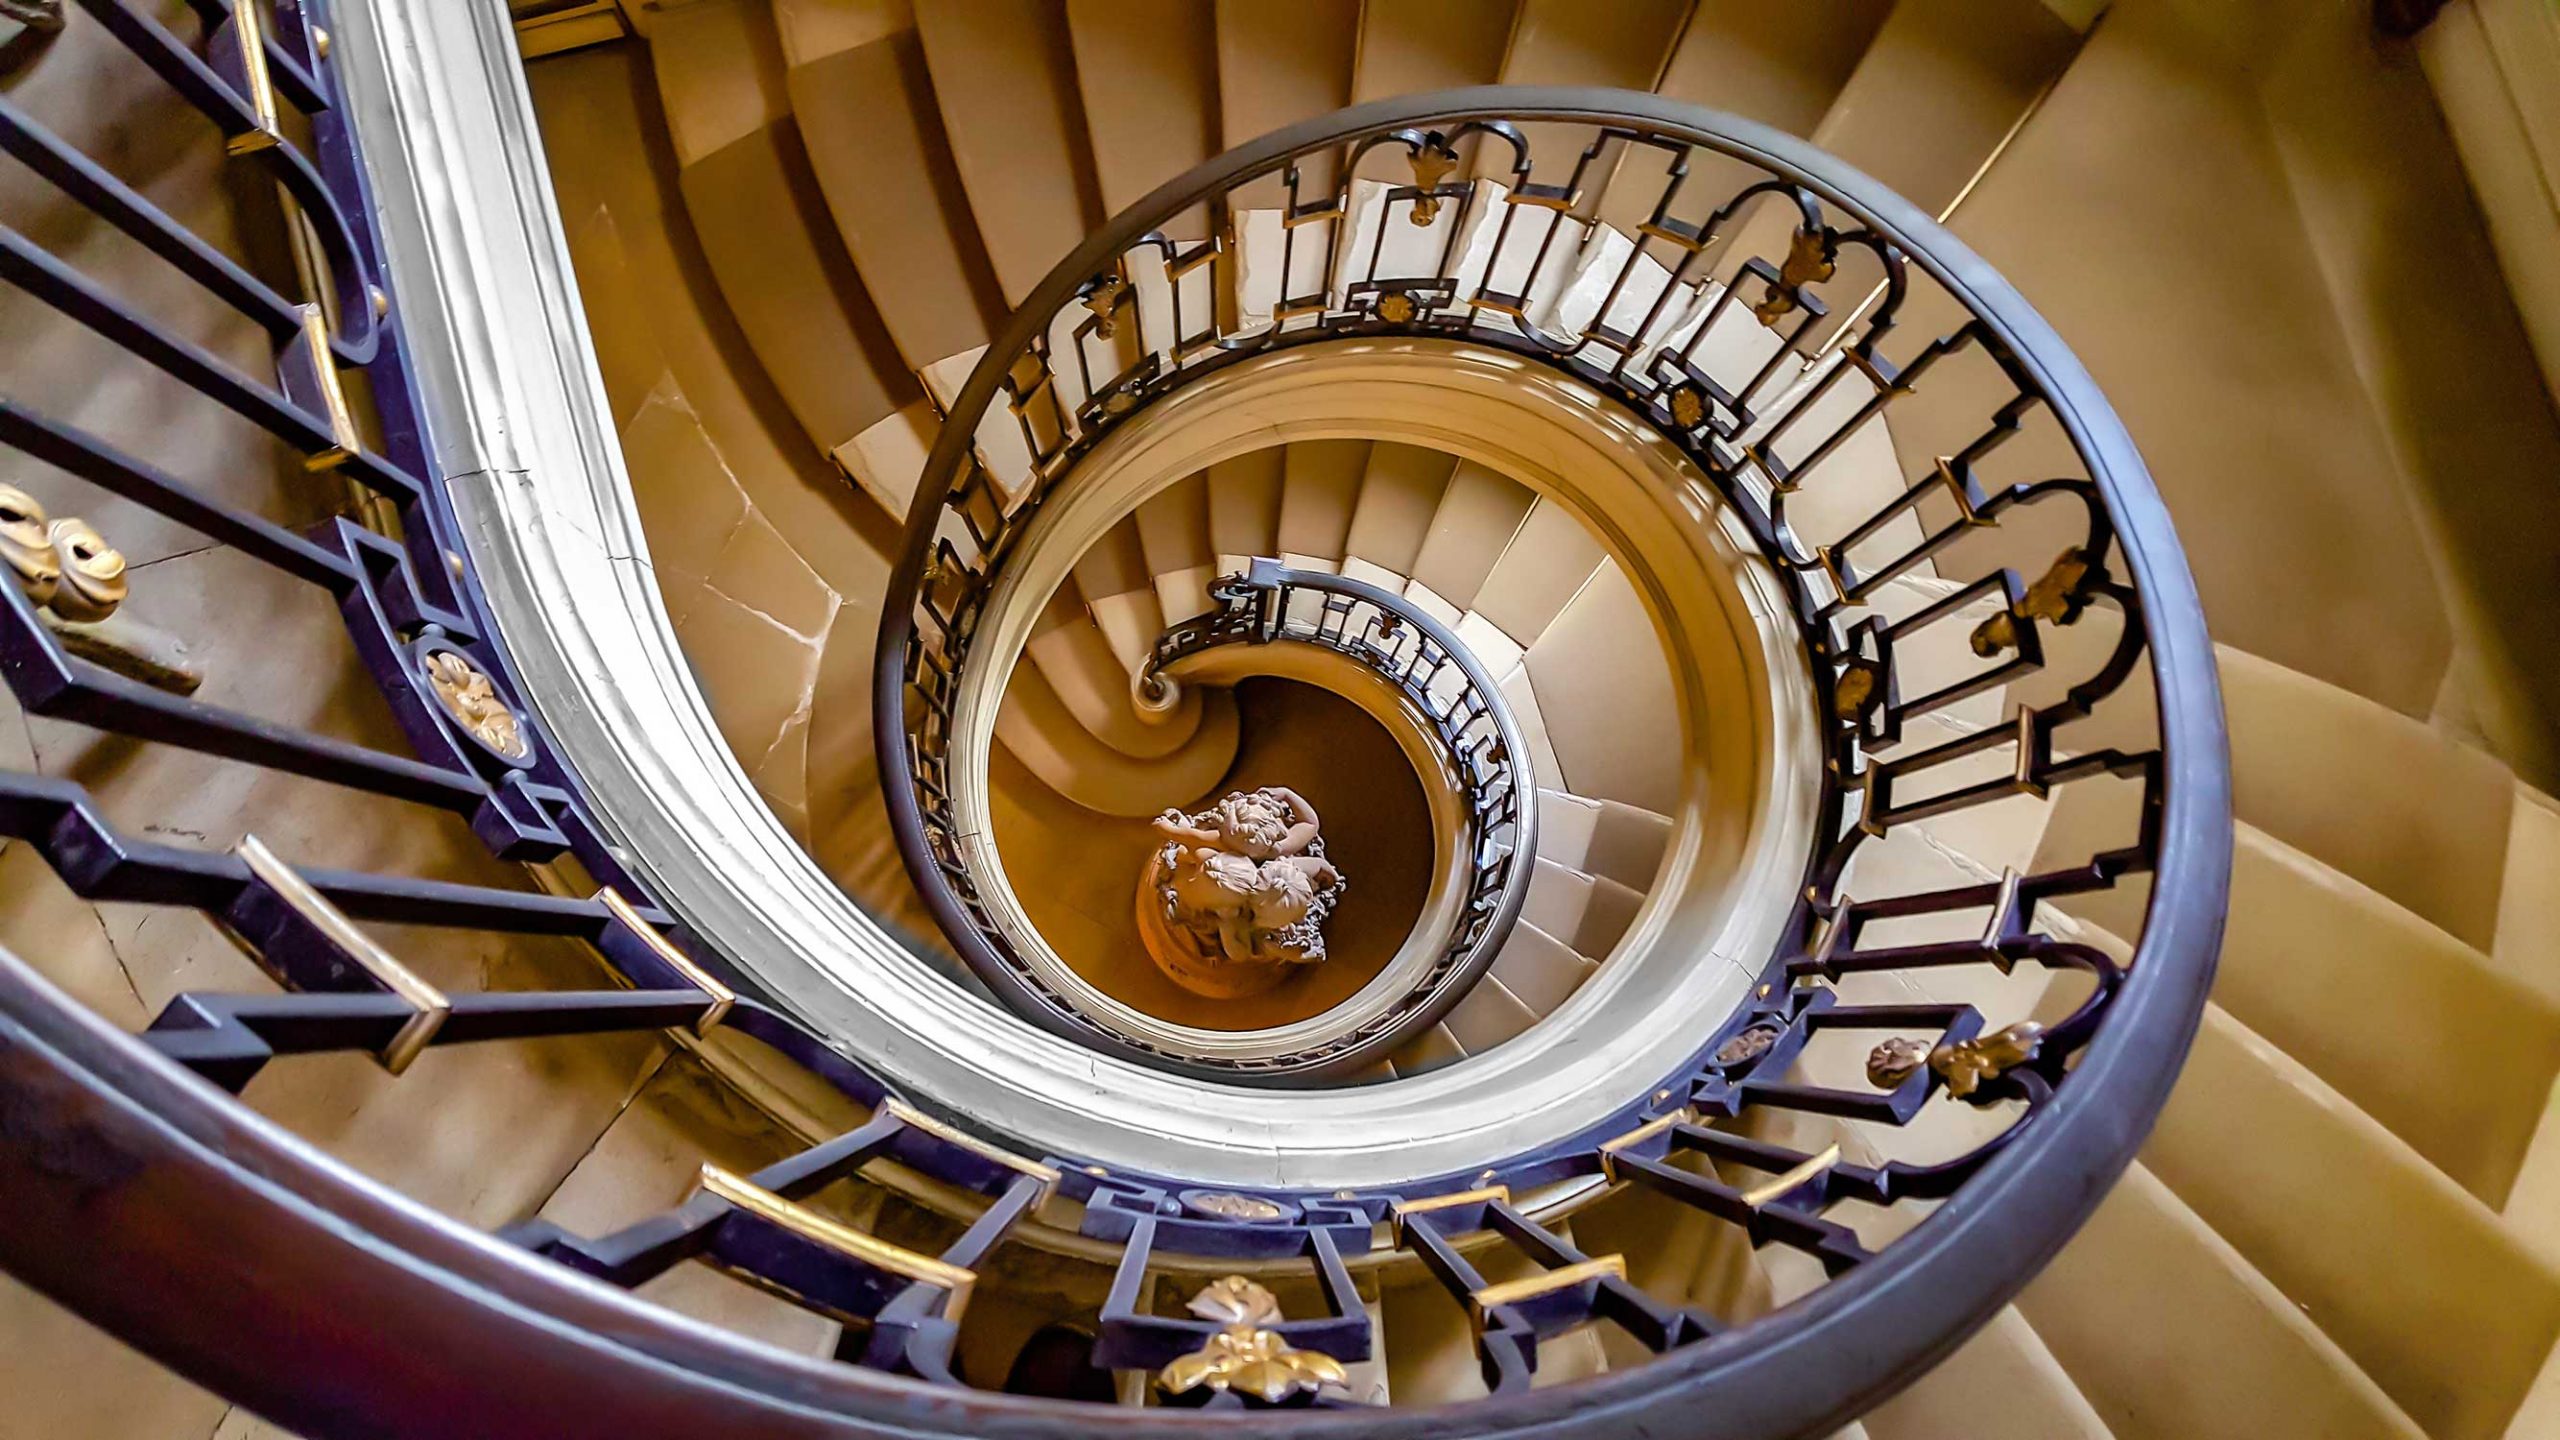 https://circaphiles.com/app/uploads/2020/10/Circaphiles-home-Amy-Barnard-All-rights-reserved_Spiral-Stairs-scaled.jpg